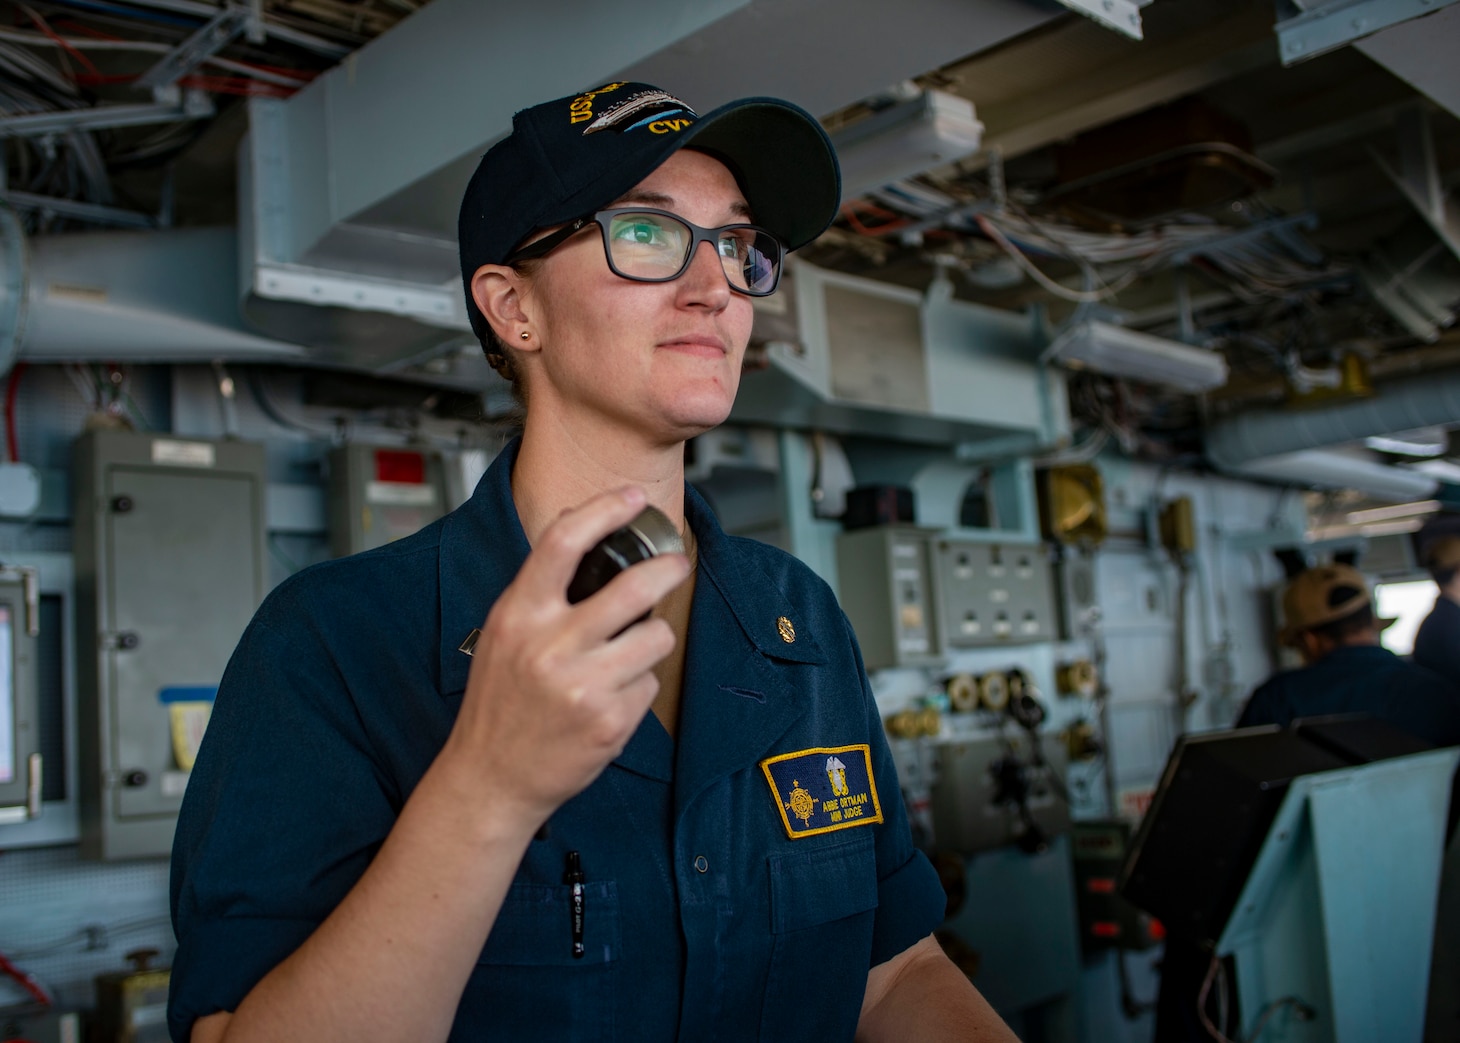 Lt. Abbie Ortman served as the "voice" of the Full Ship Shock Trials for the USS Gerald R. Ford (CVN 78).